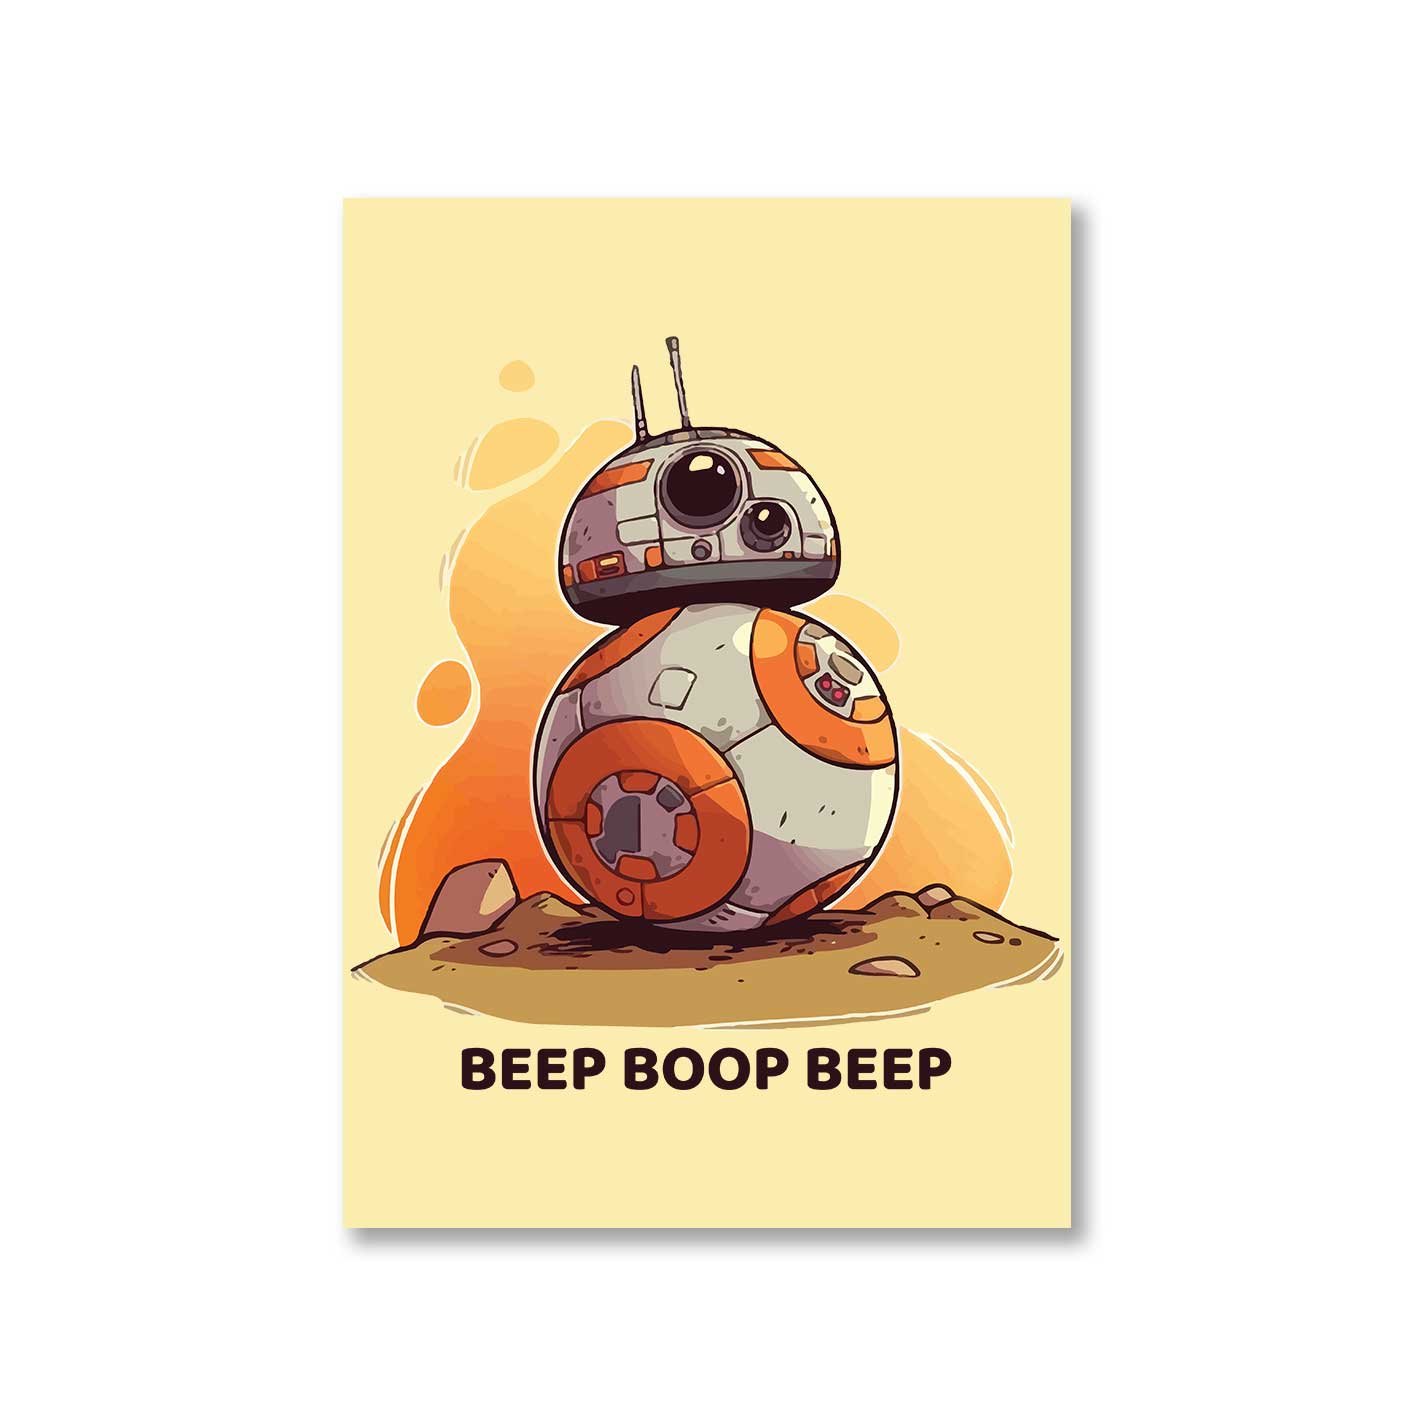 star wars bb-8 poster wall art buy online india the banyan tee tbt a4